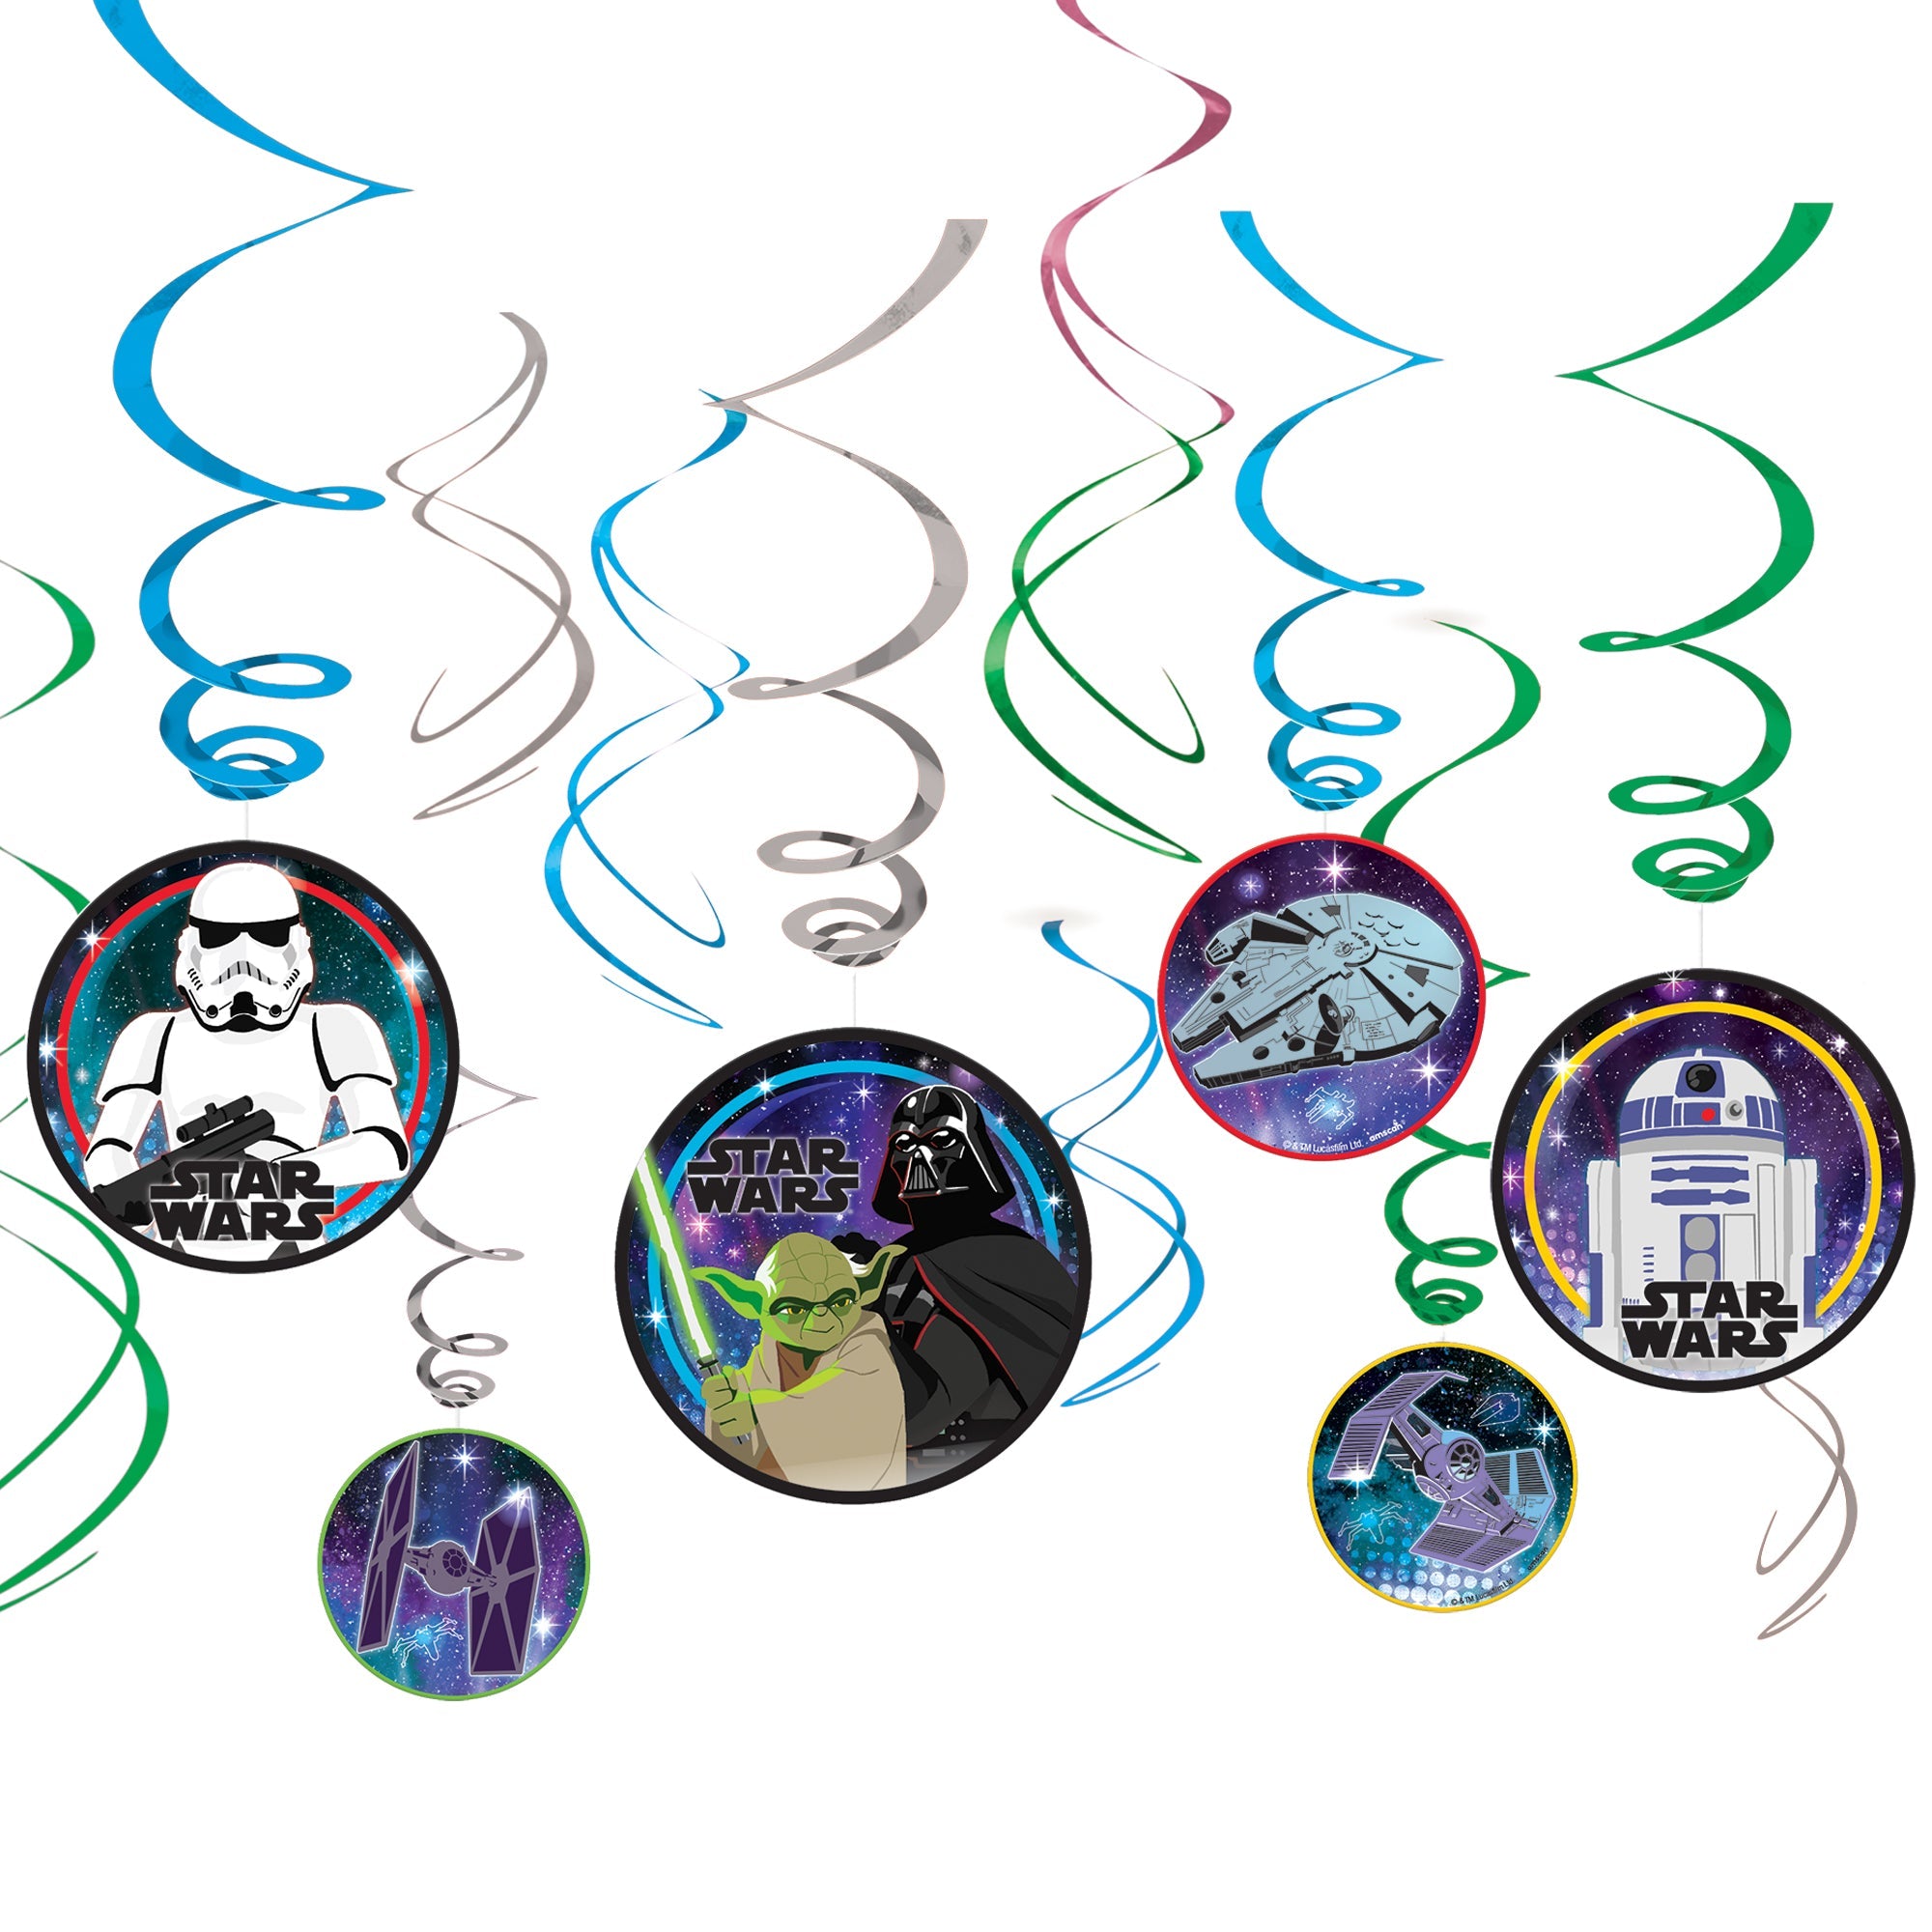 Star Wars™ Galaxy of Adventures Foil Swirl Decorations Package of 12